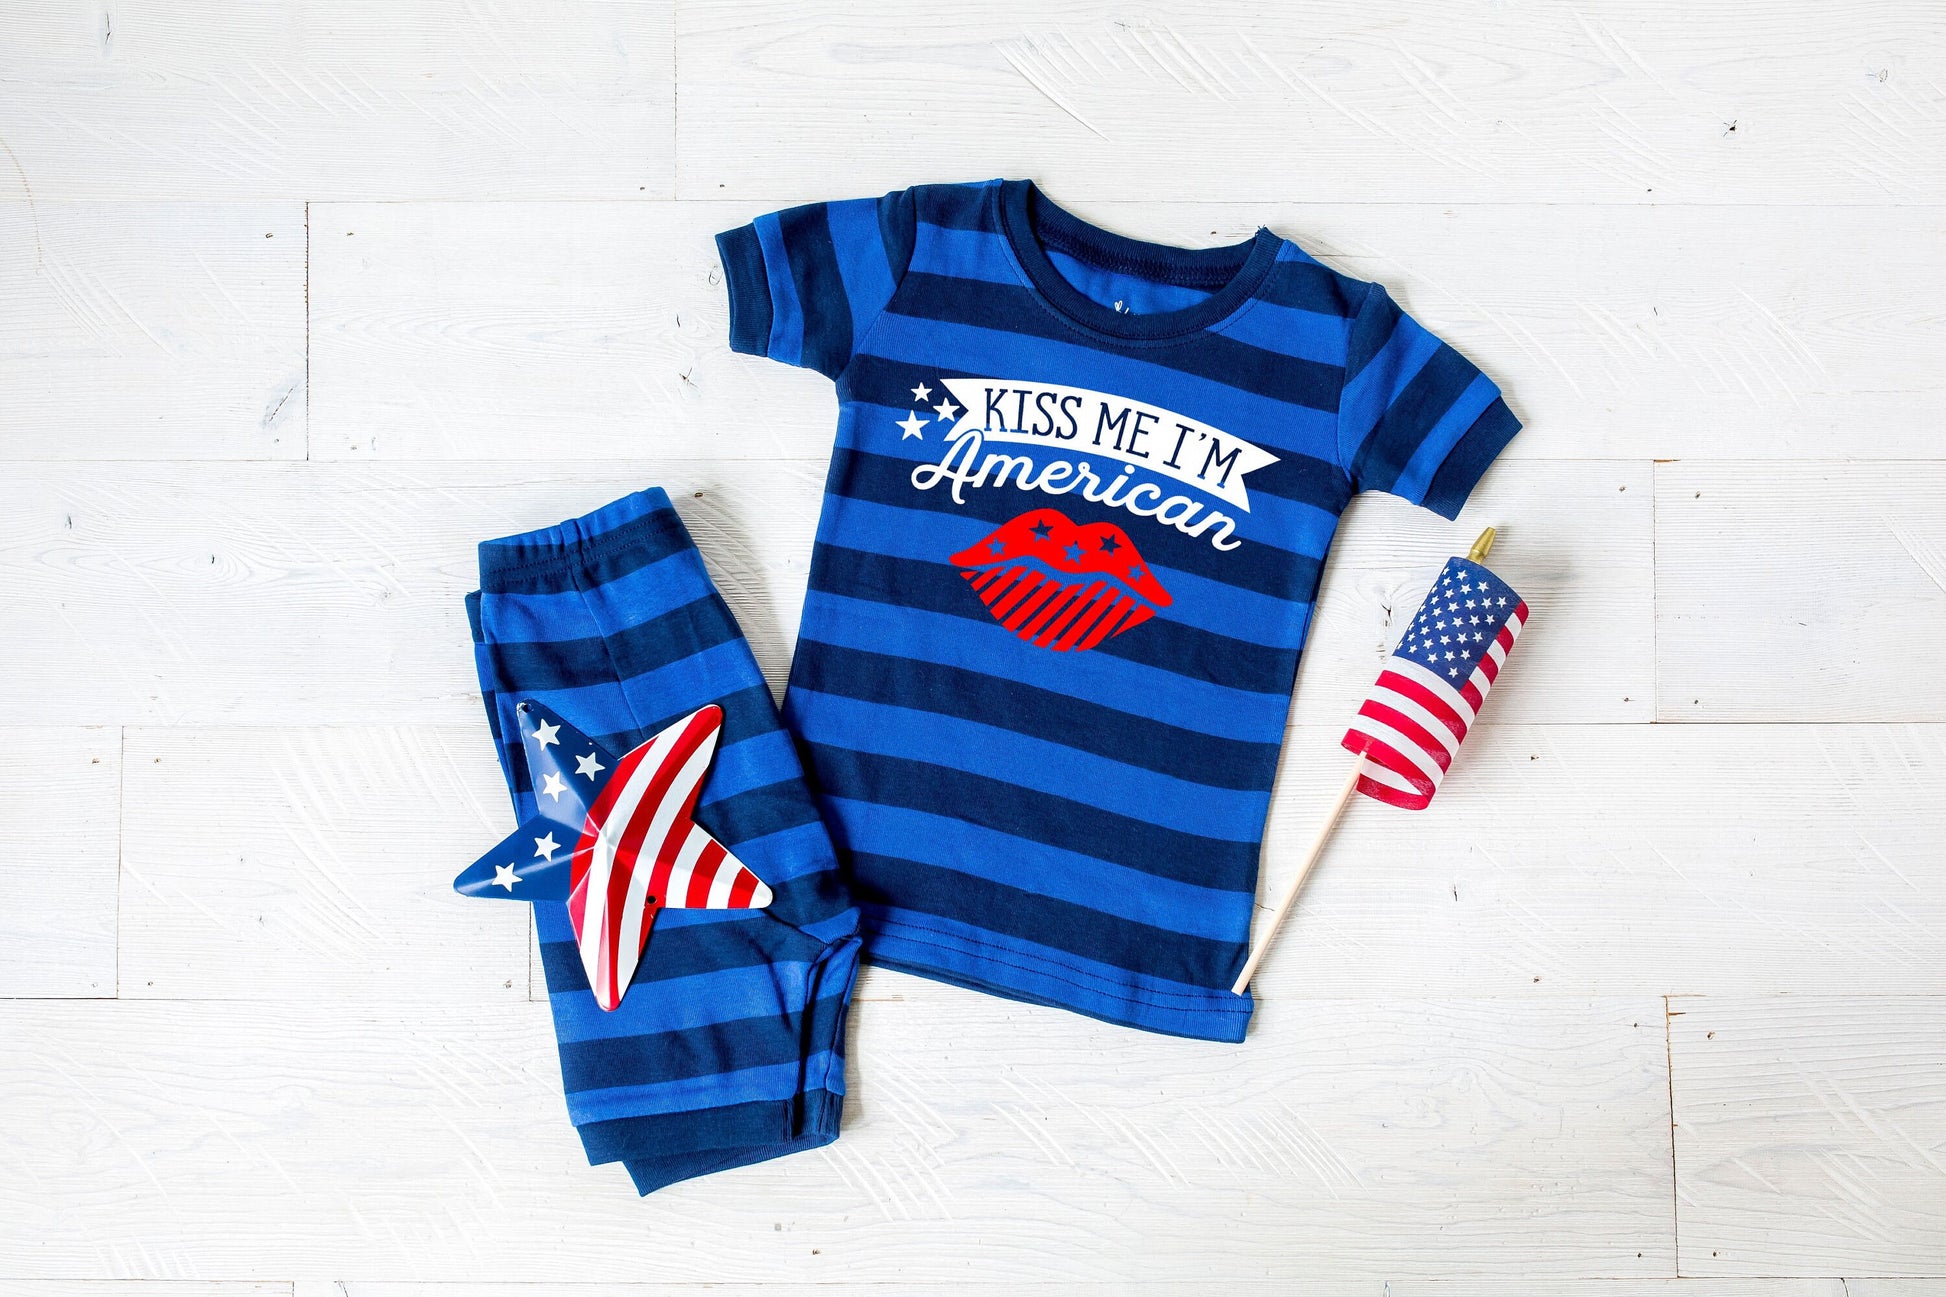 Kiss Me I'm American Blue Striped Shorts Toddler and Kids Pajamas - 4th of July Pajamas - 4th of July Toddler Pajamas Set - Girls Pajamas